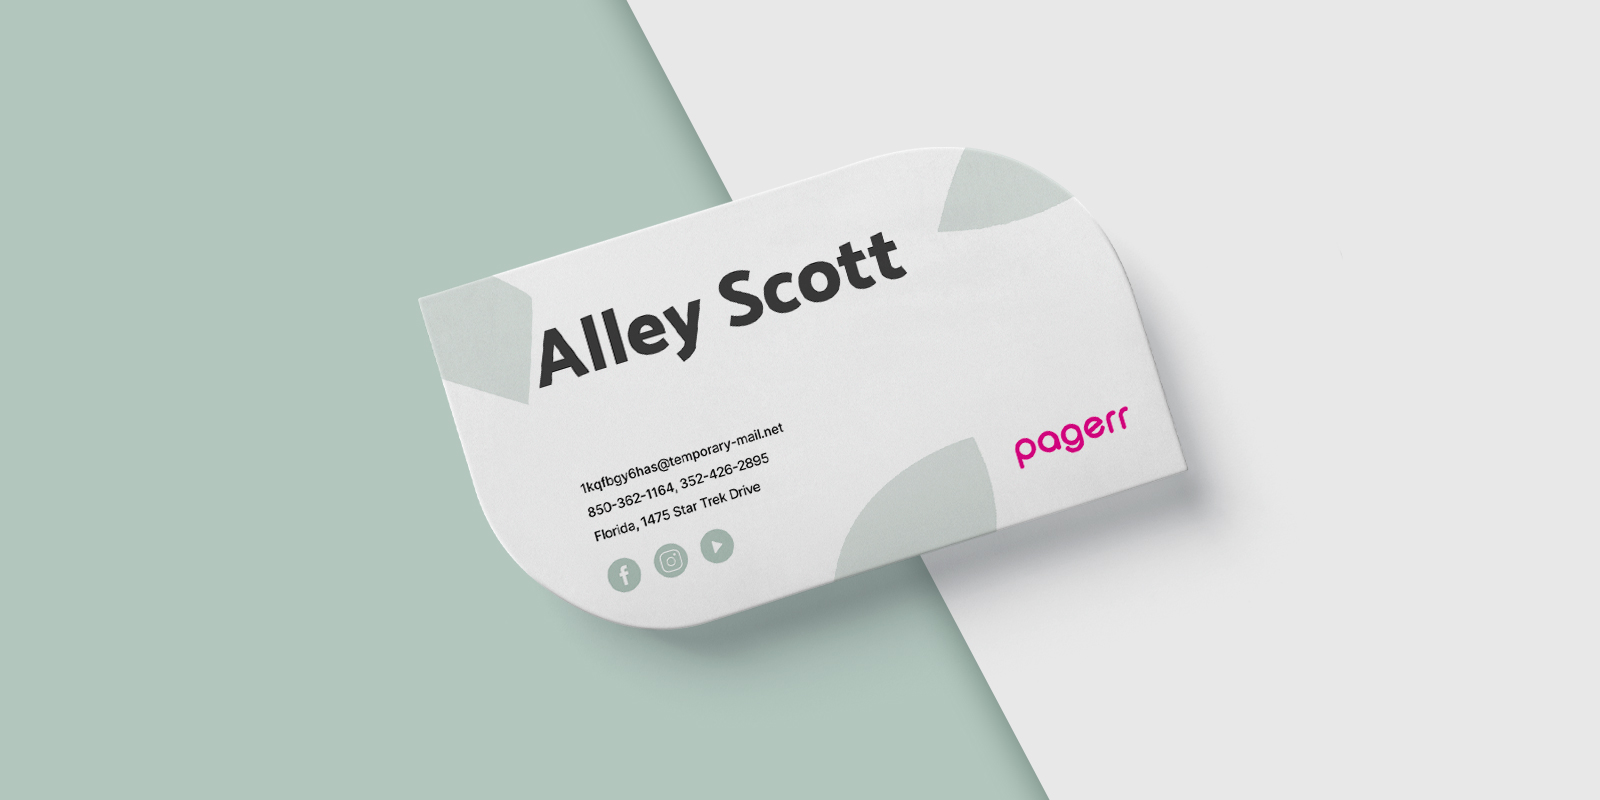 Special shape business cards in Newcastle - Print with Pagerr